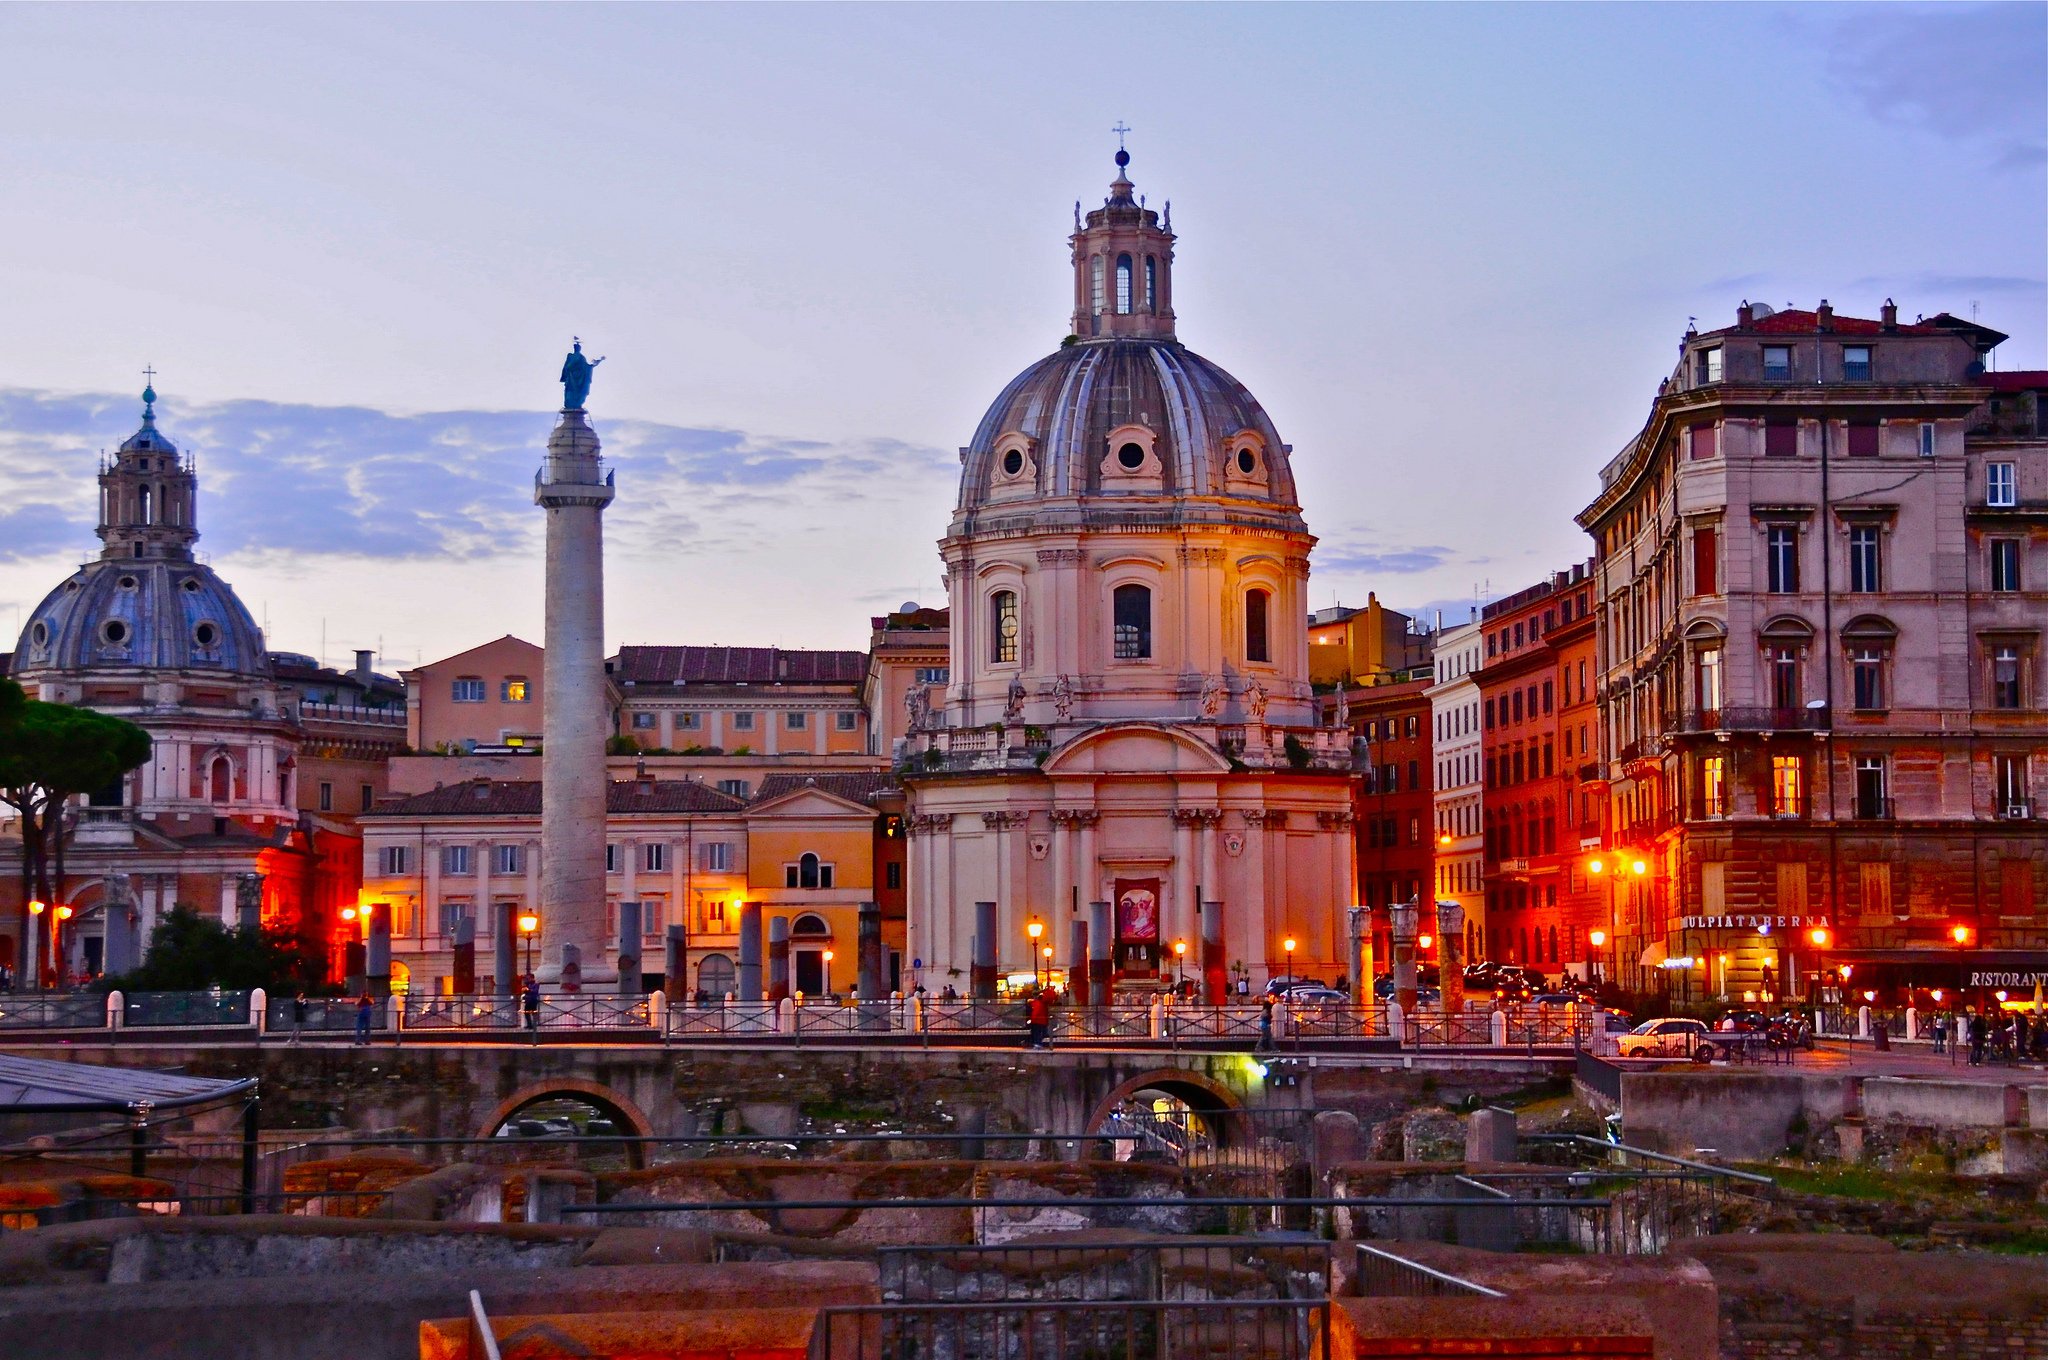 rome, Italy, Rome, Italy, Night, Sunset, Buildings, Houses, Churches, Column, Monument, Architecture, Ruins, Light, City Wallpaper